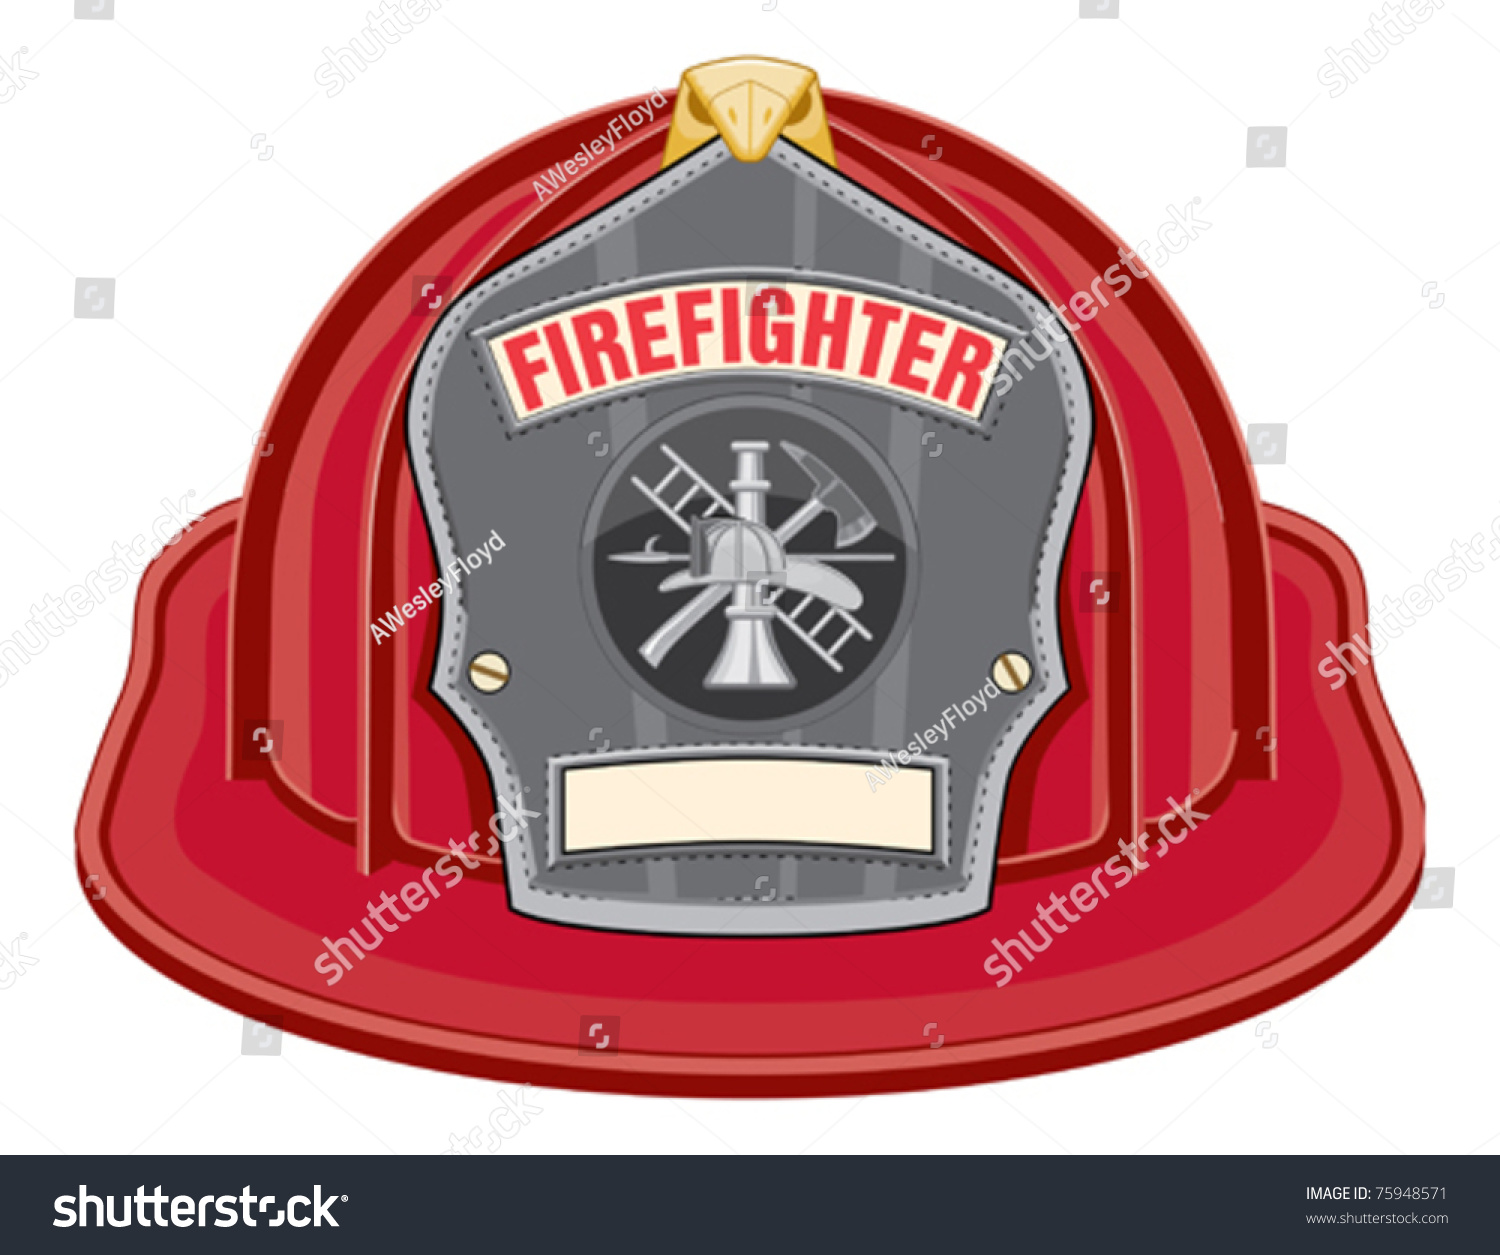 firefighter hat clipart - photo #36